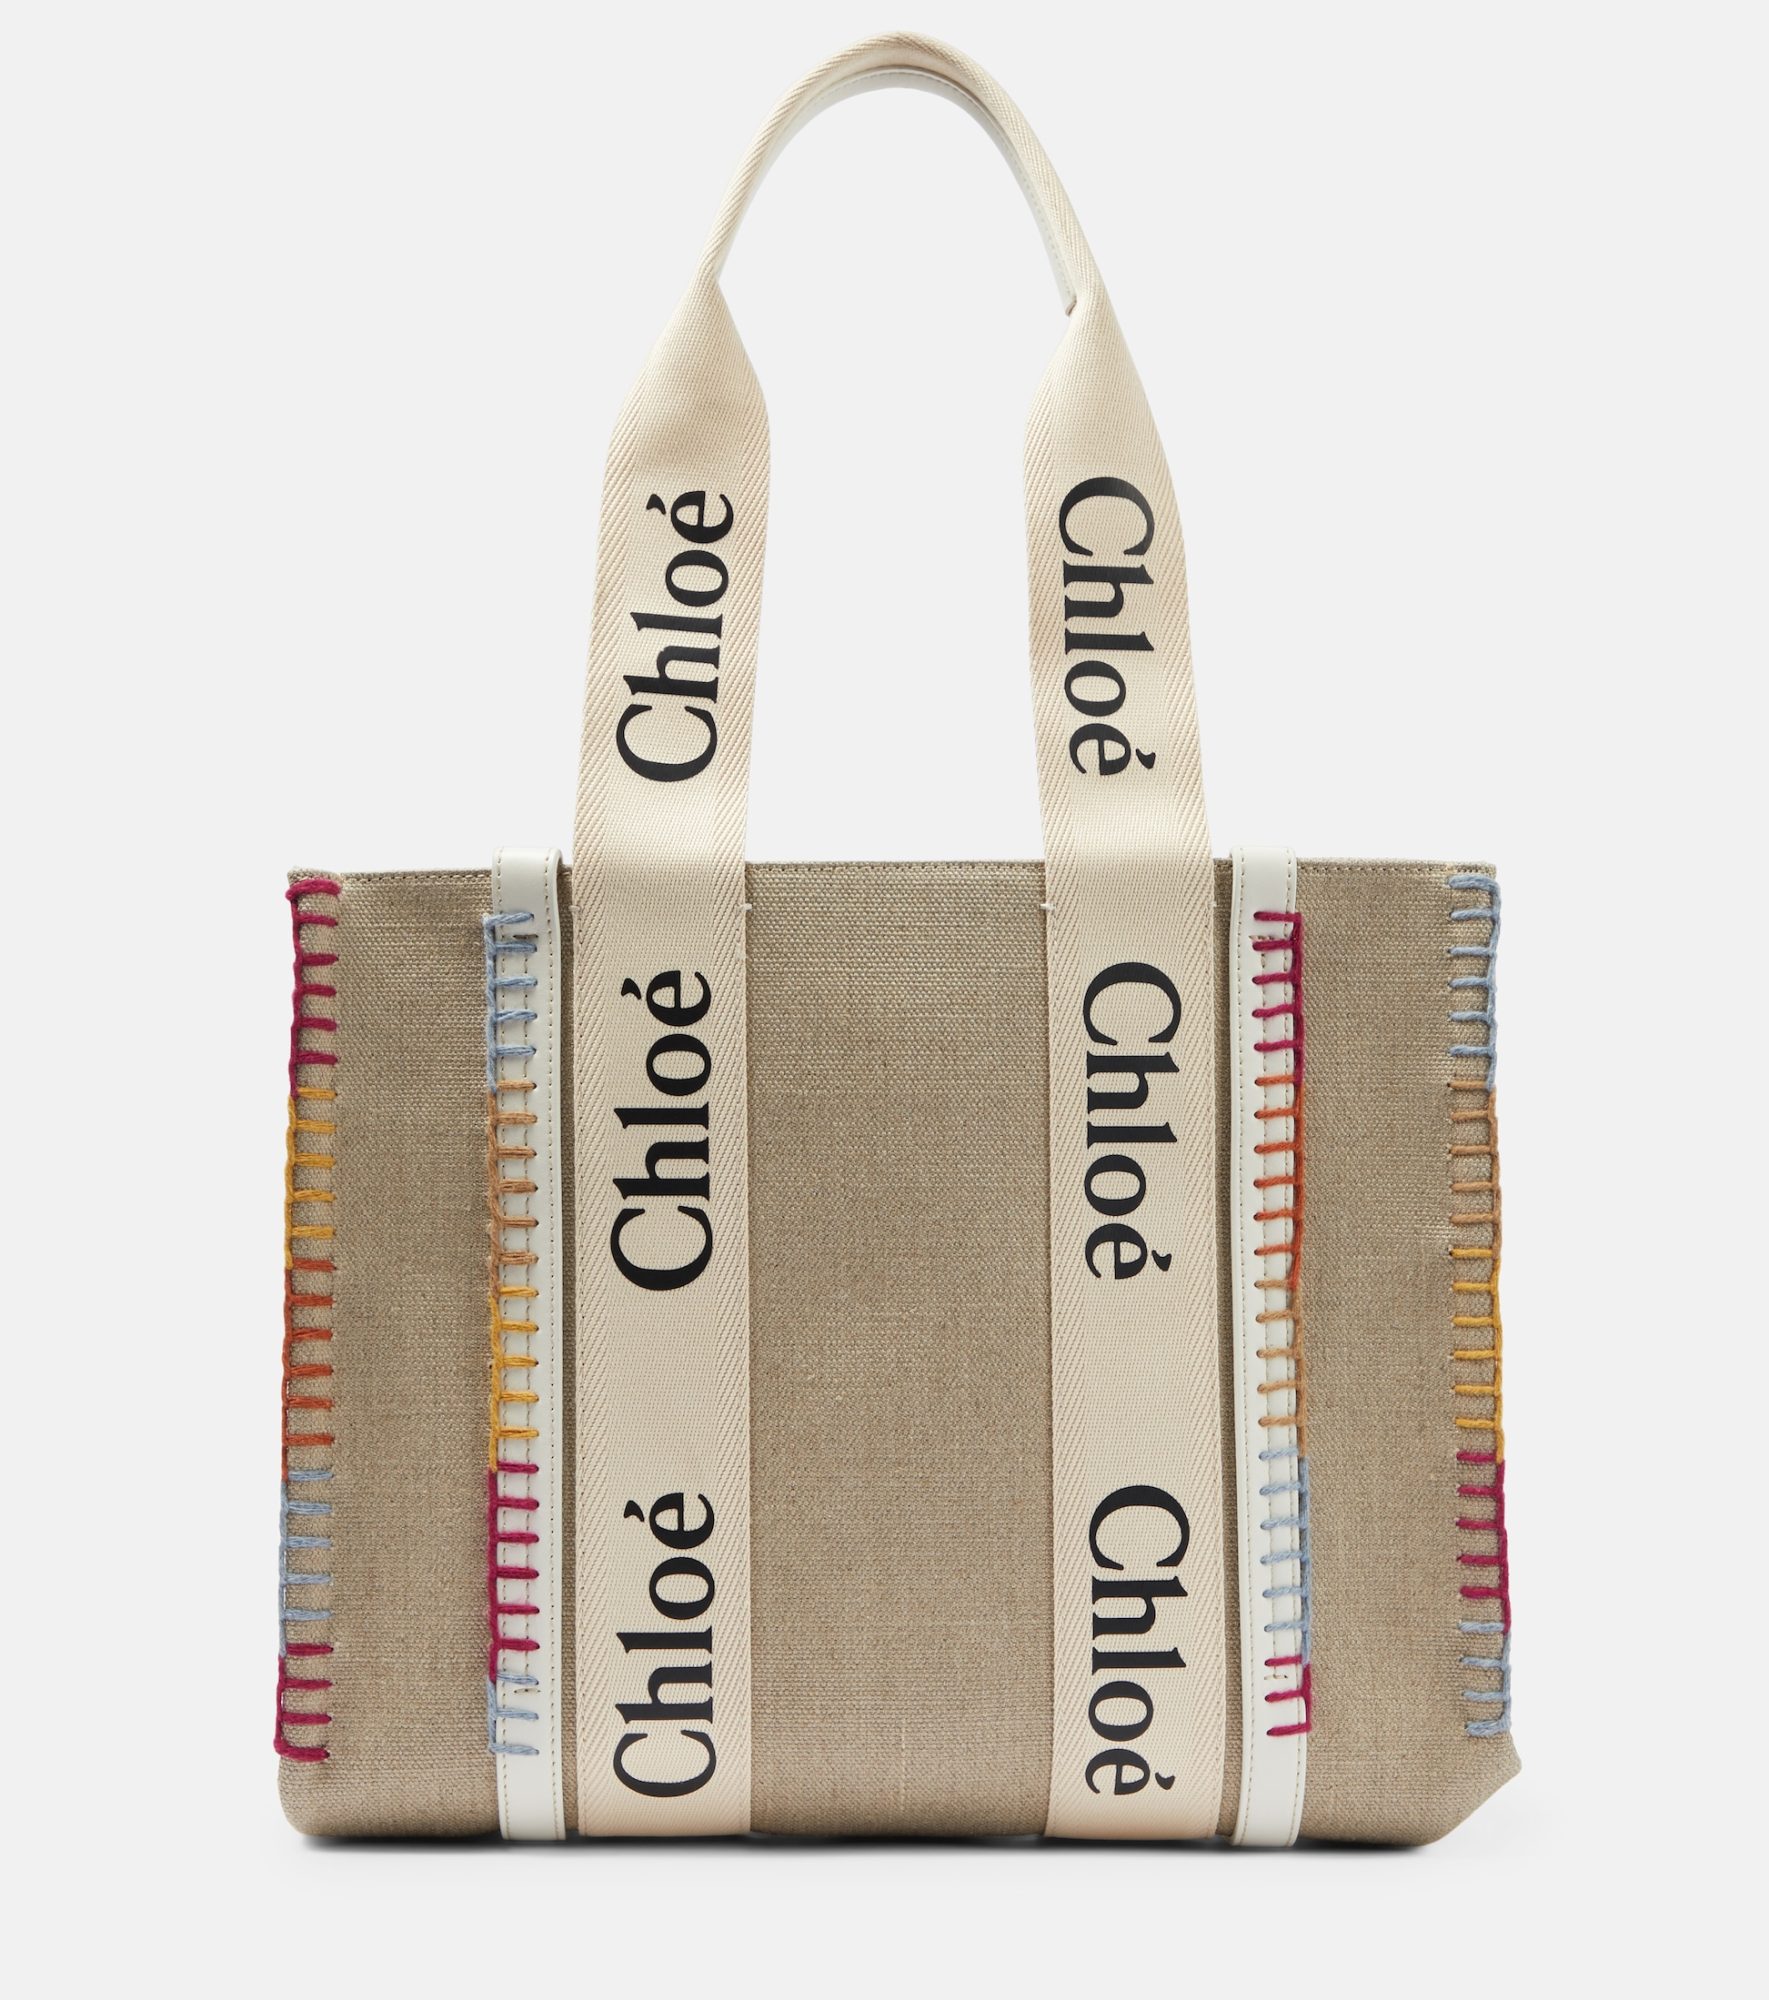 Large Chloe canvas and leather tote - 990 euros